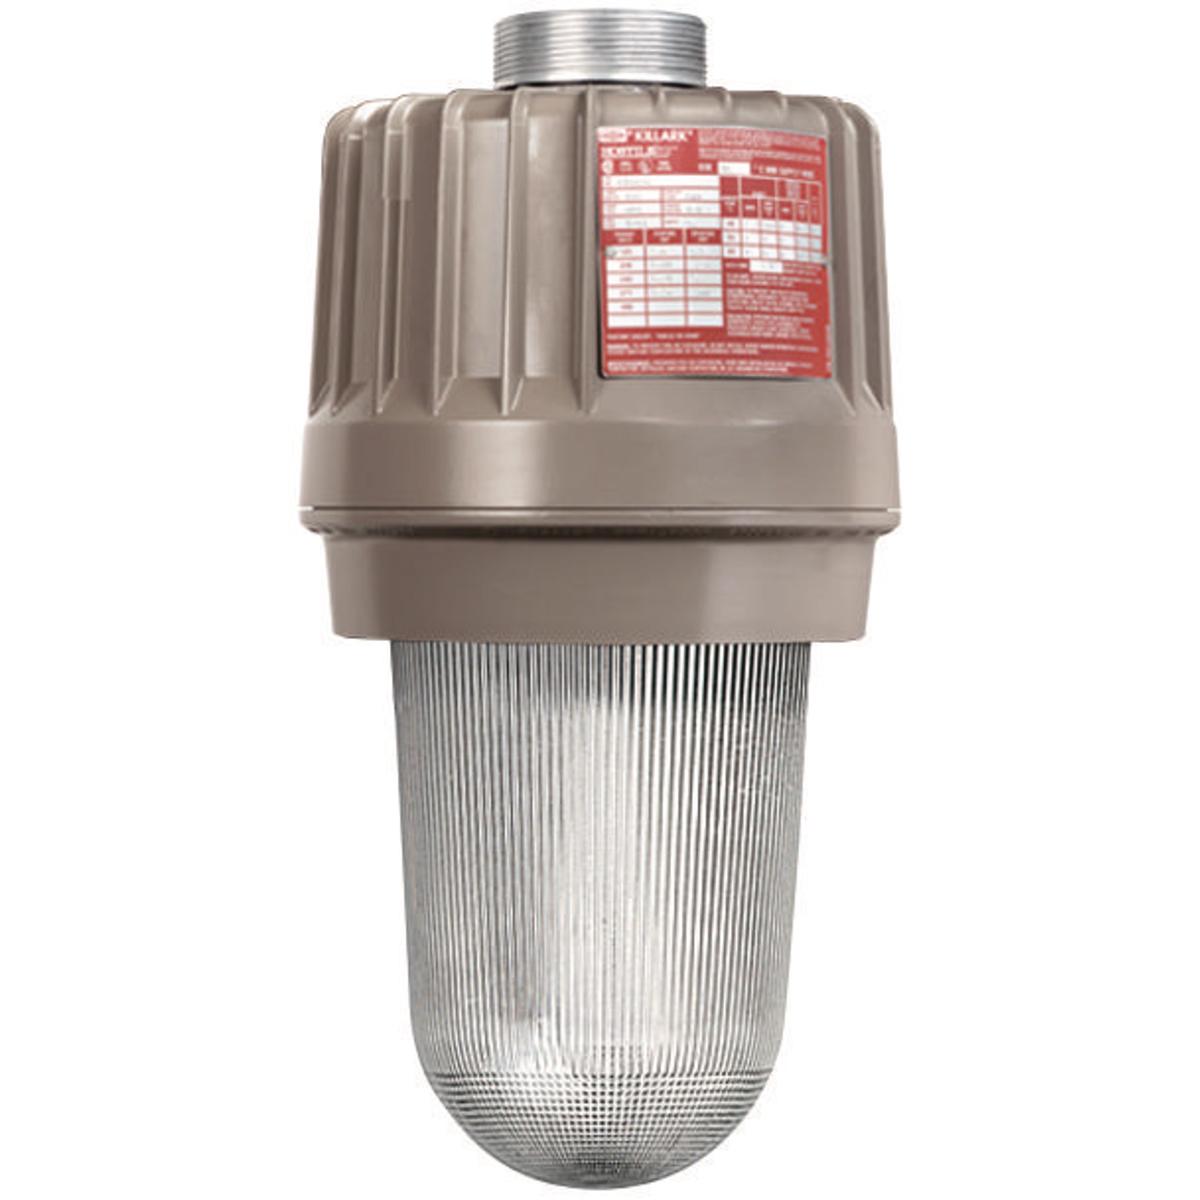 Hubbell EZP175Q 175W 480V Pulse-Start Metal Halide with Auxiliary Quartz Standby  ; Three light sources – High Pressure Sodium (50-400W), Metal Halide (70-400W) and Pulse Start Metal Halide (175-400W) ; Mounting choice –Pendant, ceiling, 25˚ stanchion or 90˚ wall mount, 